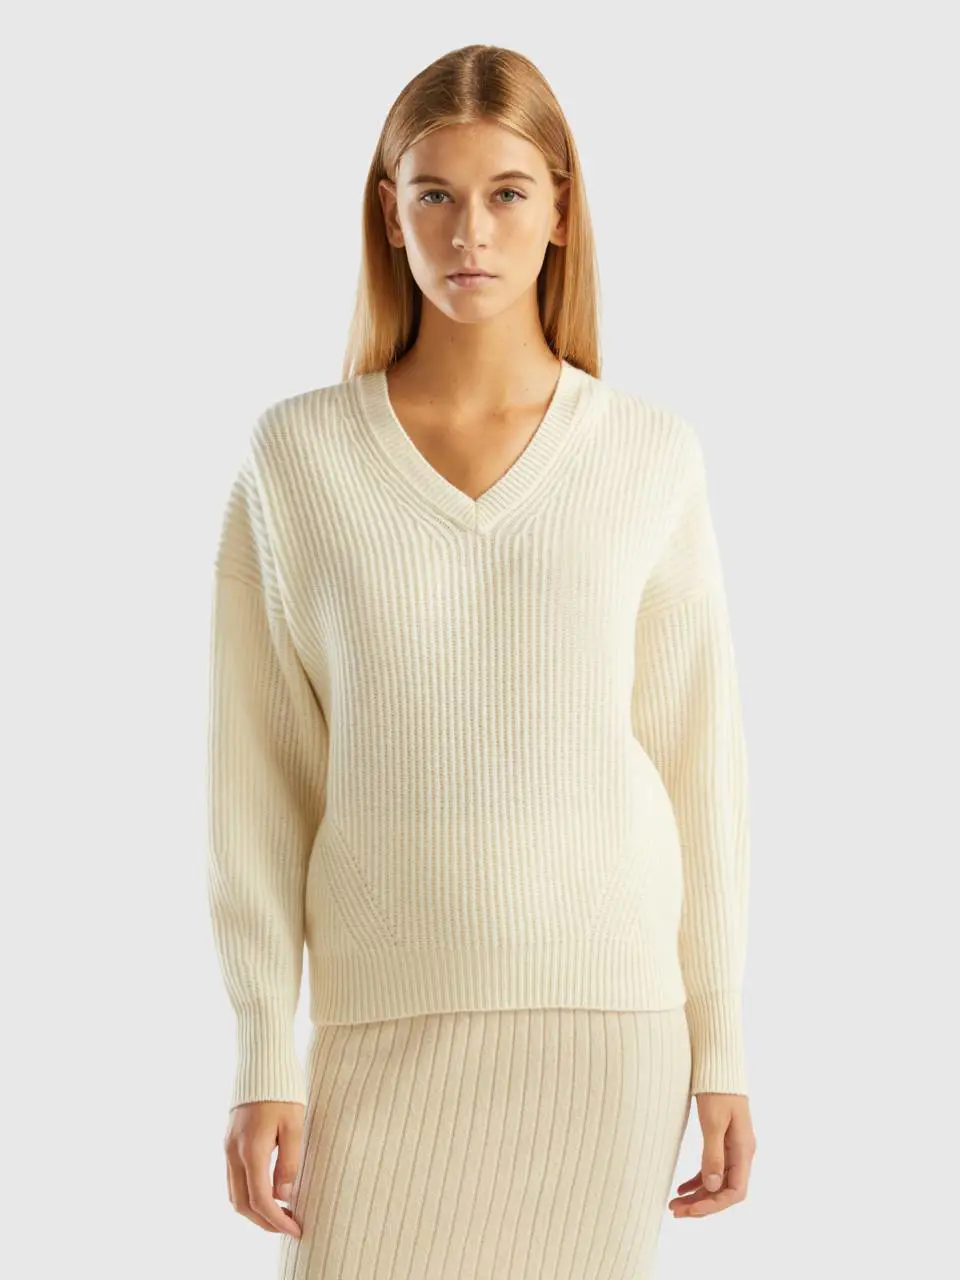 Benetton soft sweater with v-neck. 1